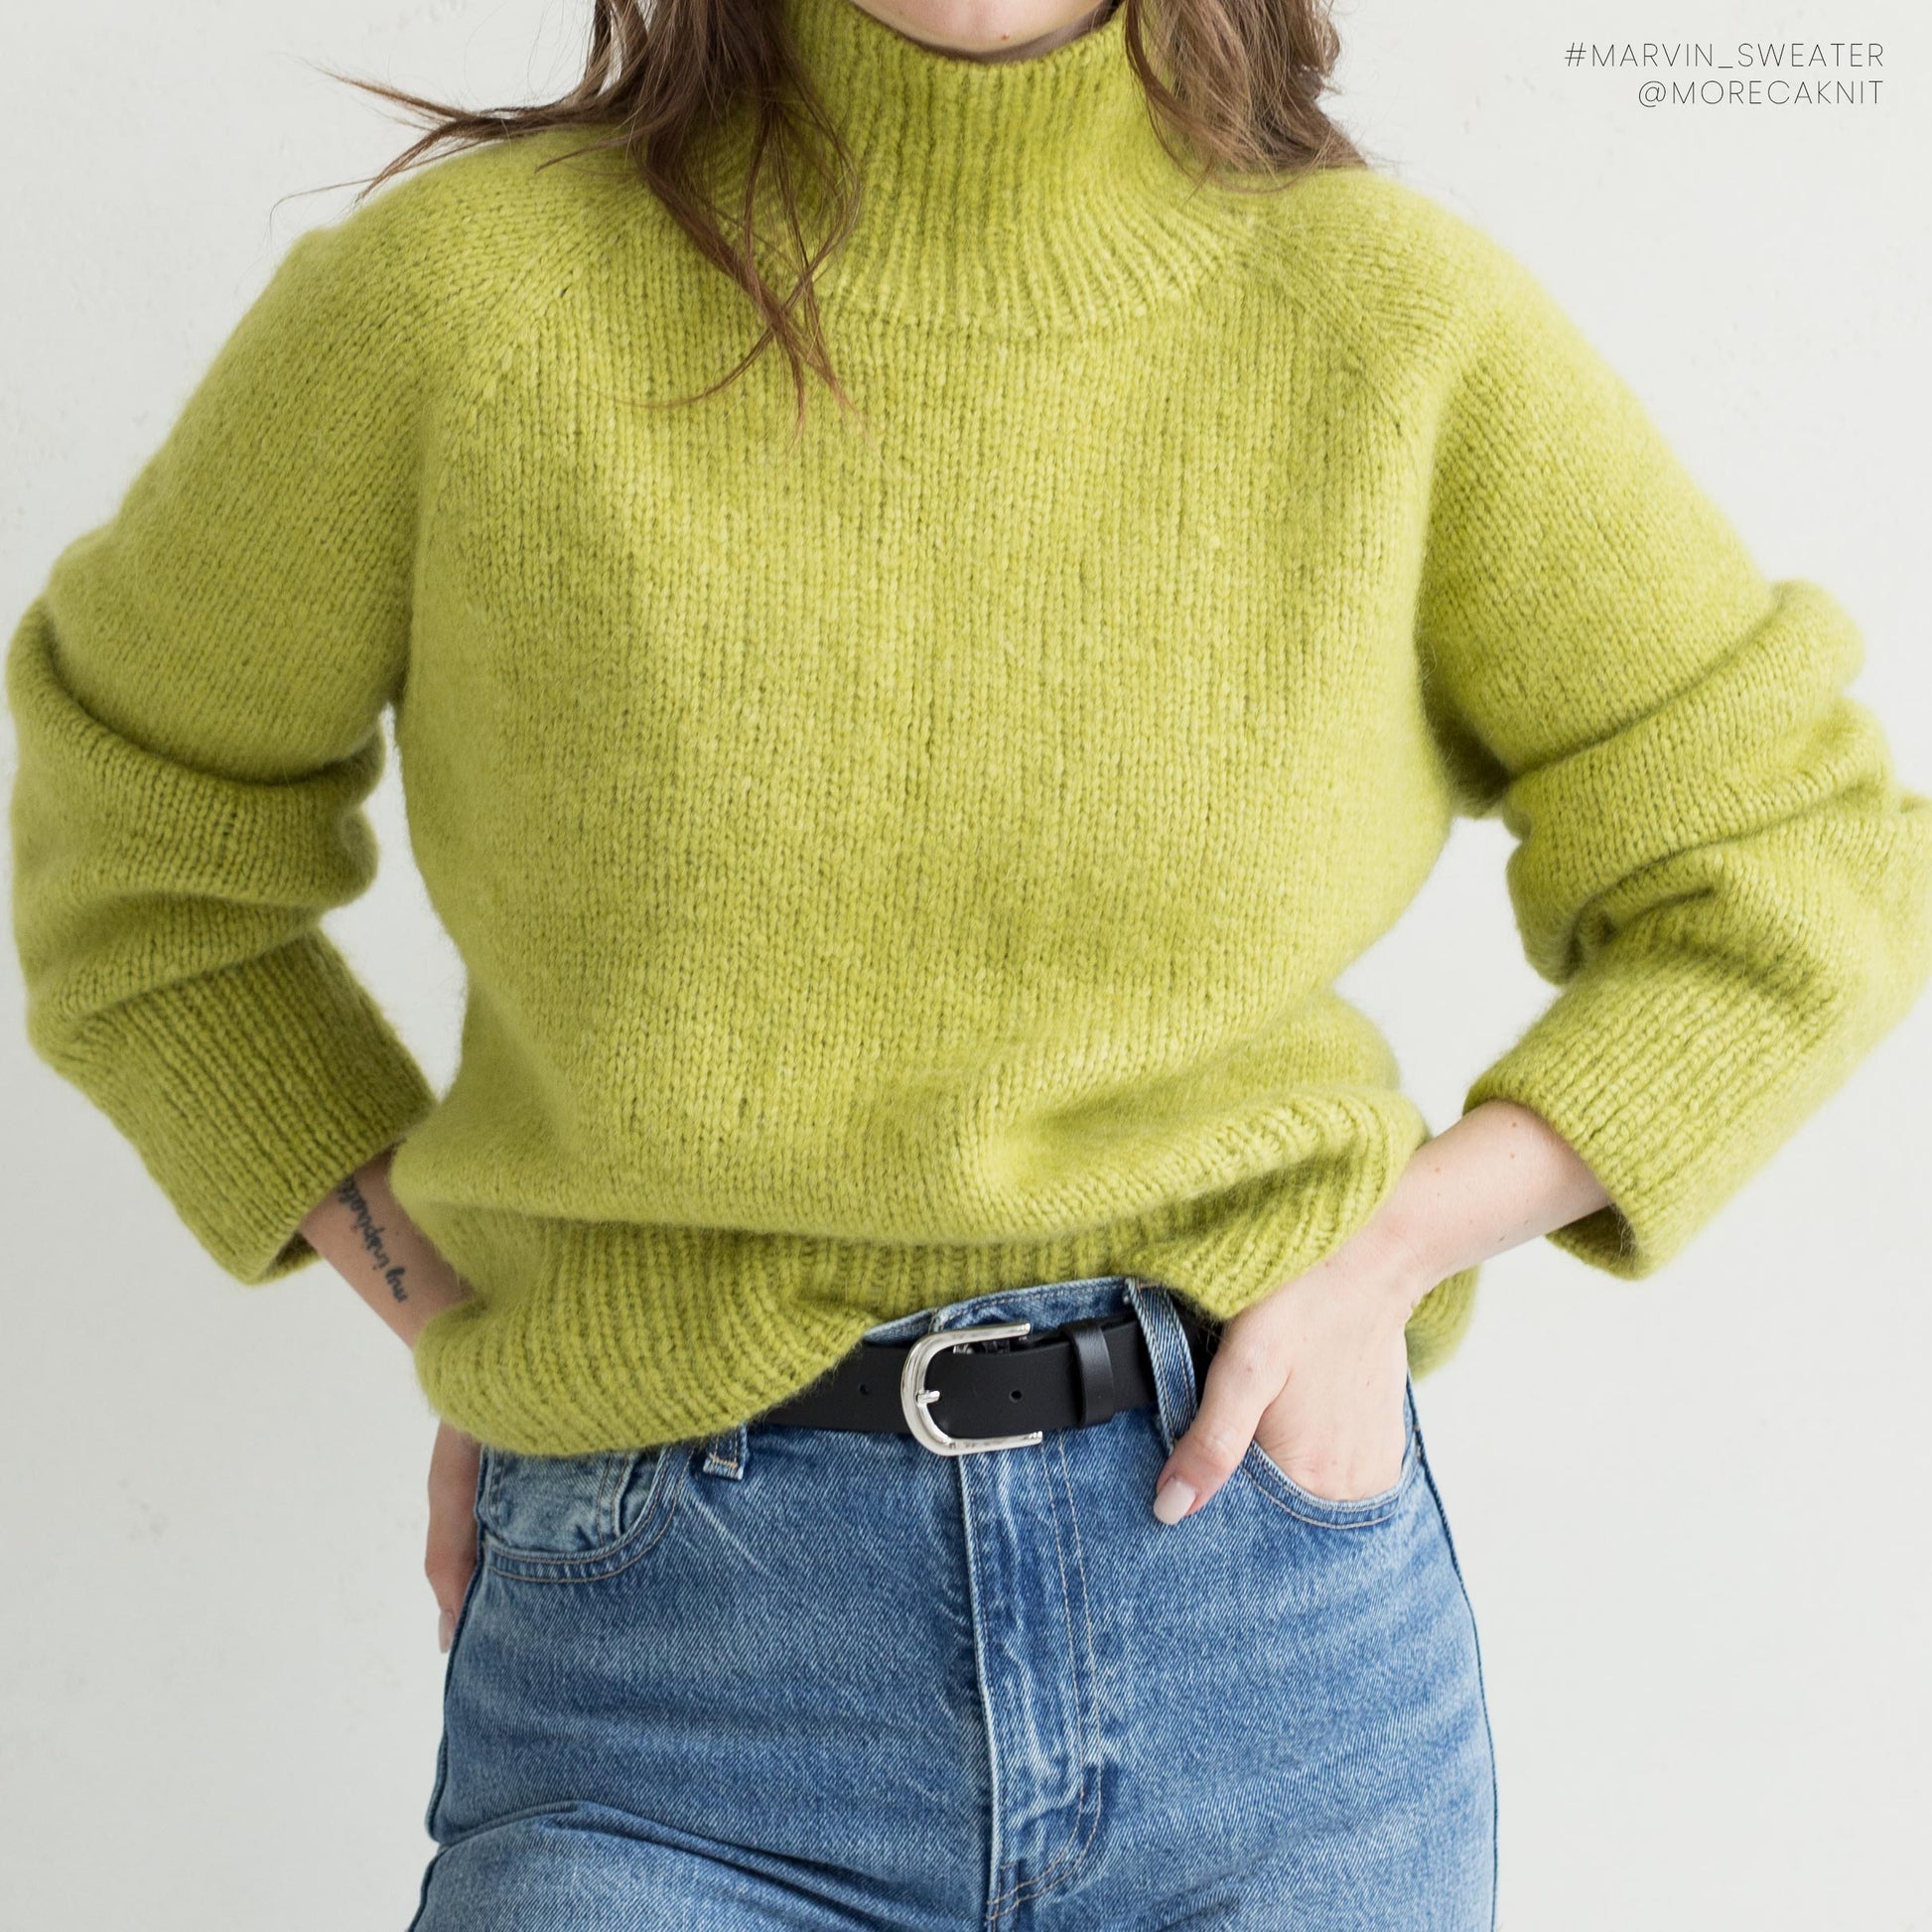 Knit a cozy Marvin Sweater with long ribbing on the sleeves and body with MorecaKnit's pattern